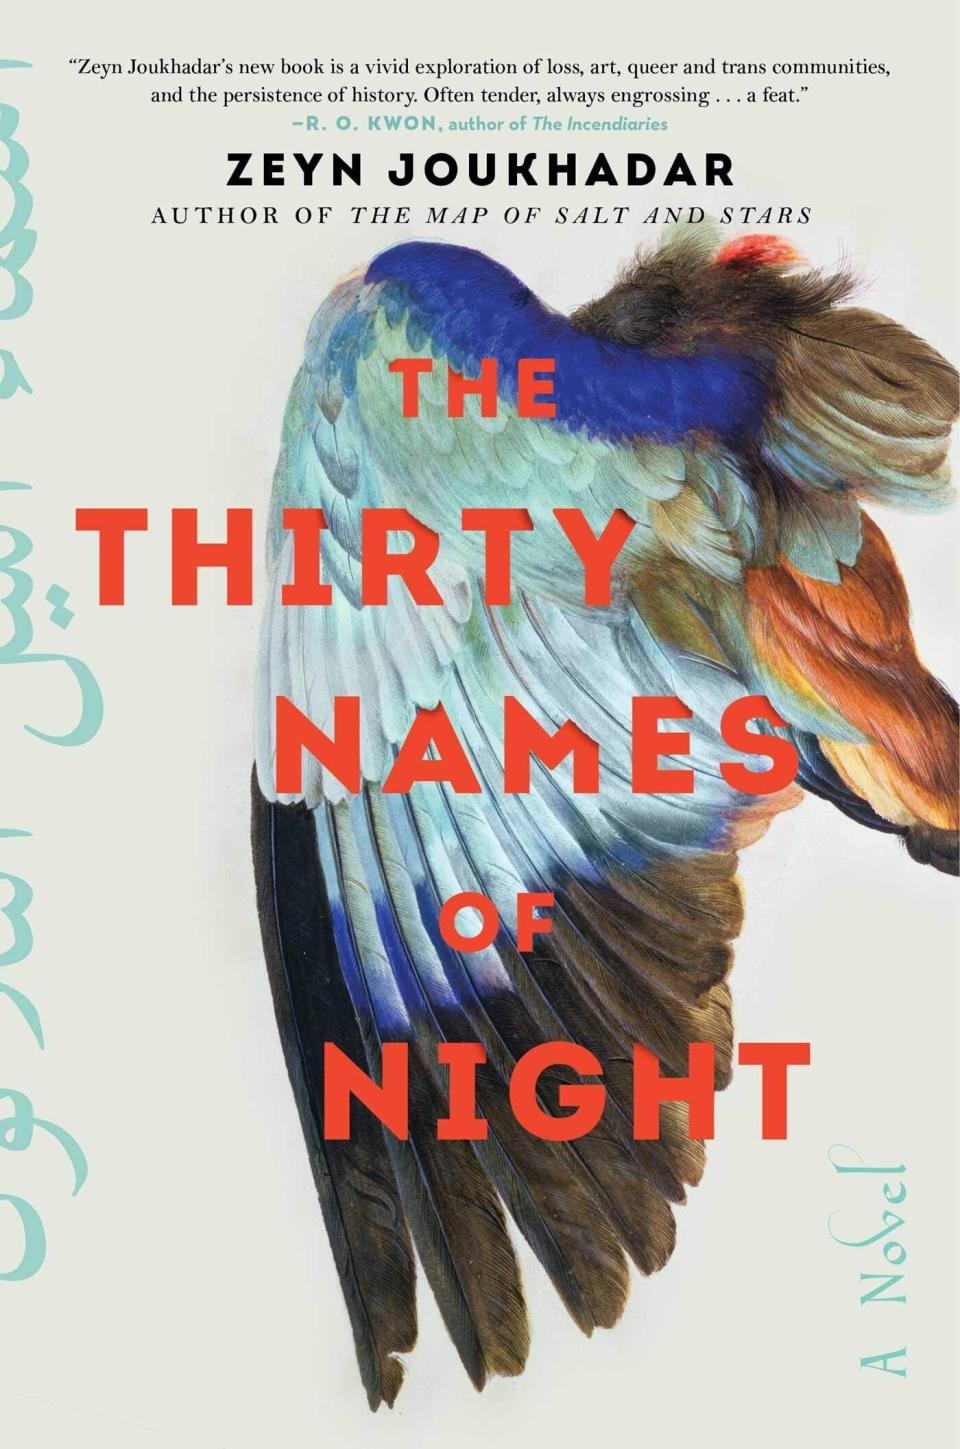 &ldquo;The Thirty Names of Night&rdquo; begins fives years after a suspicious fire kills the mother of a closeted Syrian American trans boy, who is searching for a new name while caring for his grandmother. Pick up this book if you want to read about ghosts, Little Syria in New York City, rare birds, the history of queer and transgender people and more. Read more about it on <a href="https://www.goodreads.com/book/show/52764801-the-thirty-names-of-night" target="_blank" rel="noopener noreferrer">Goodreads</a>, and grab a copy on <a href="https://amzn.to/3p7PFmC" target="_blank" rel="noopener noreferrer">Amazon</a> or <a href="https://fave.co/2TXFhiS" target="_blank" rel="noopener noreferrer">Bookshop</a>.<br /><br /><i>Expected release date:</i> <i>Nov.</i><i> 24 </i>